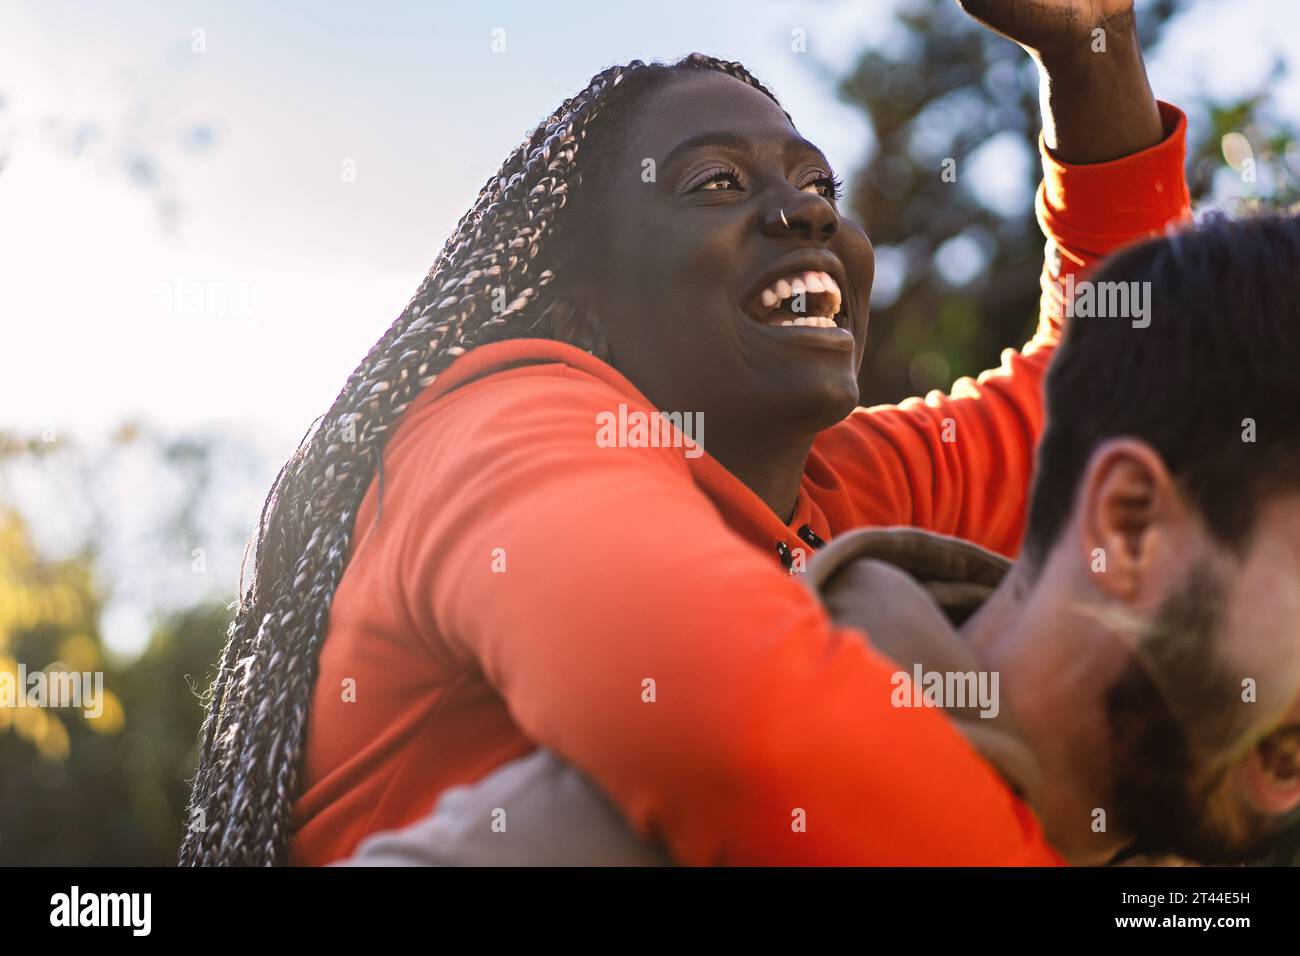 Joyful African descent woman with elongated braids gives a gleeful laugh while getting a piggyback ride from her partner outdoors, capturing a genuine Stock Photo